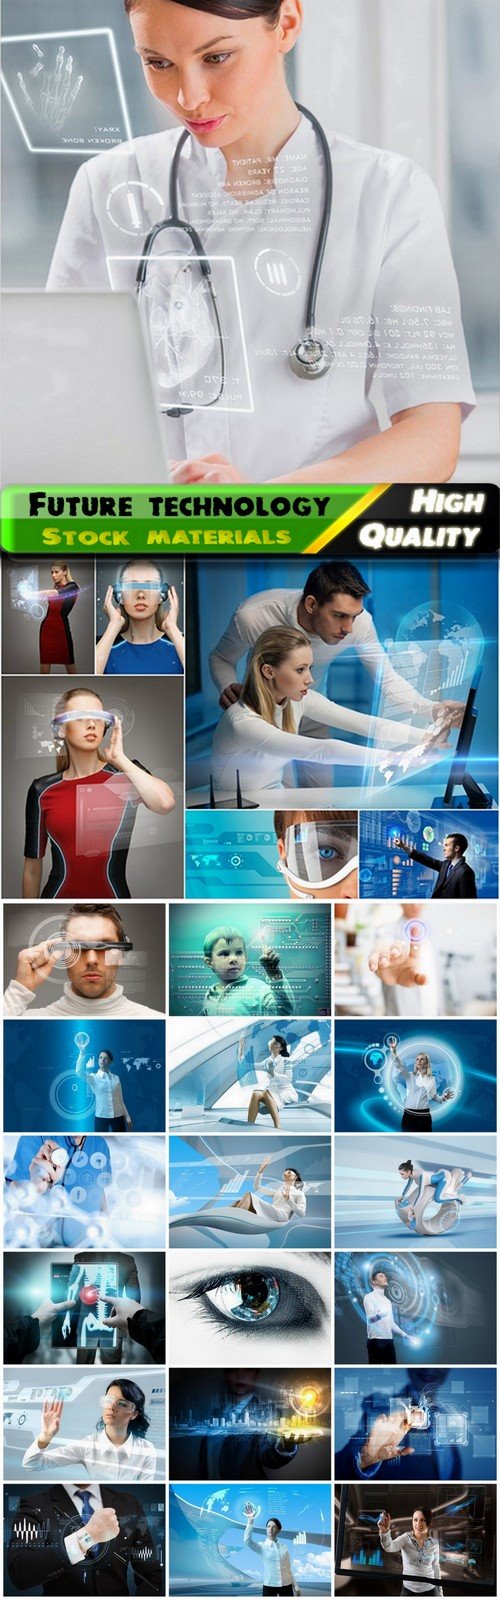 Future technology conceptual images from stock -25 HQ Jpg